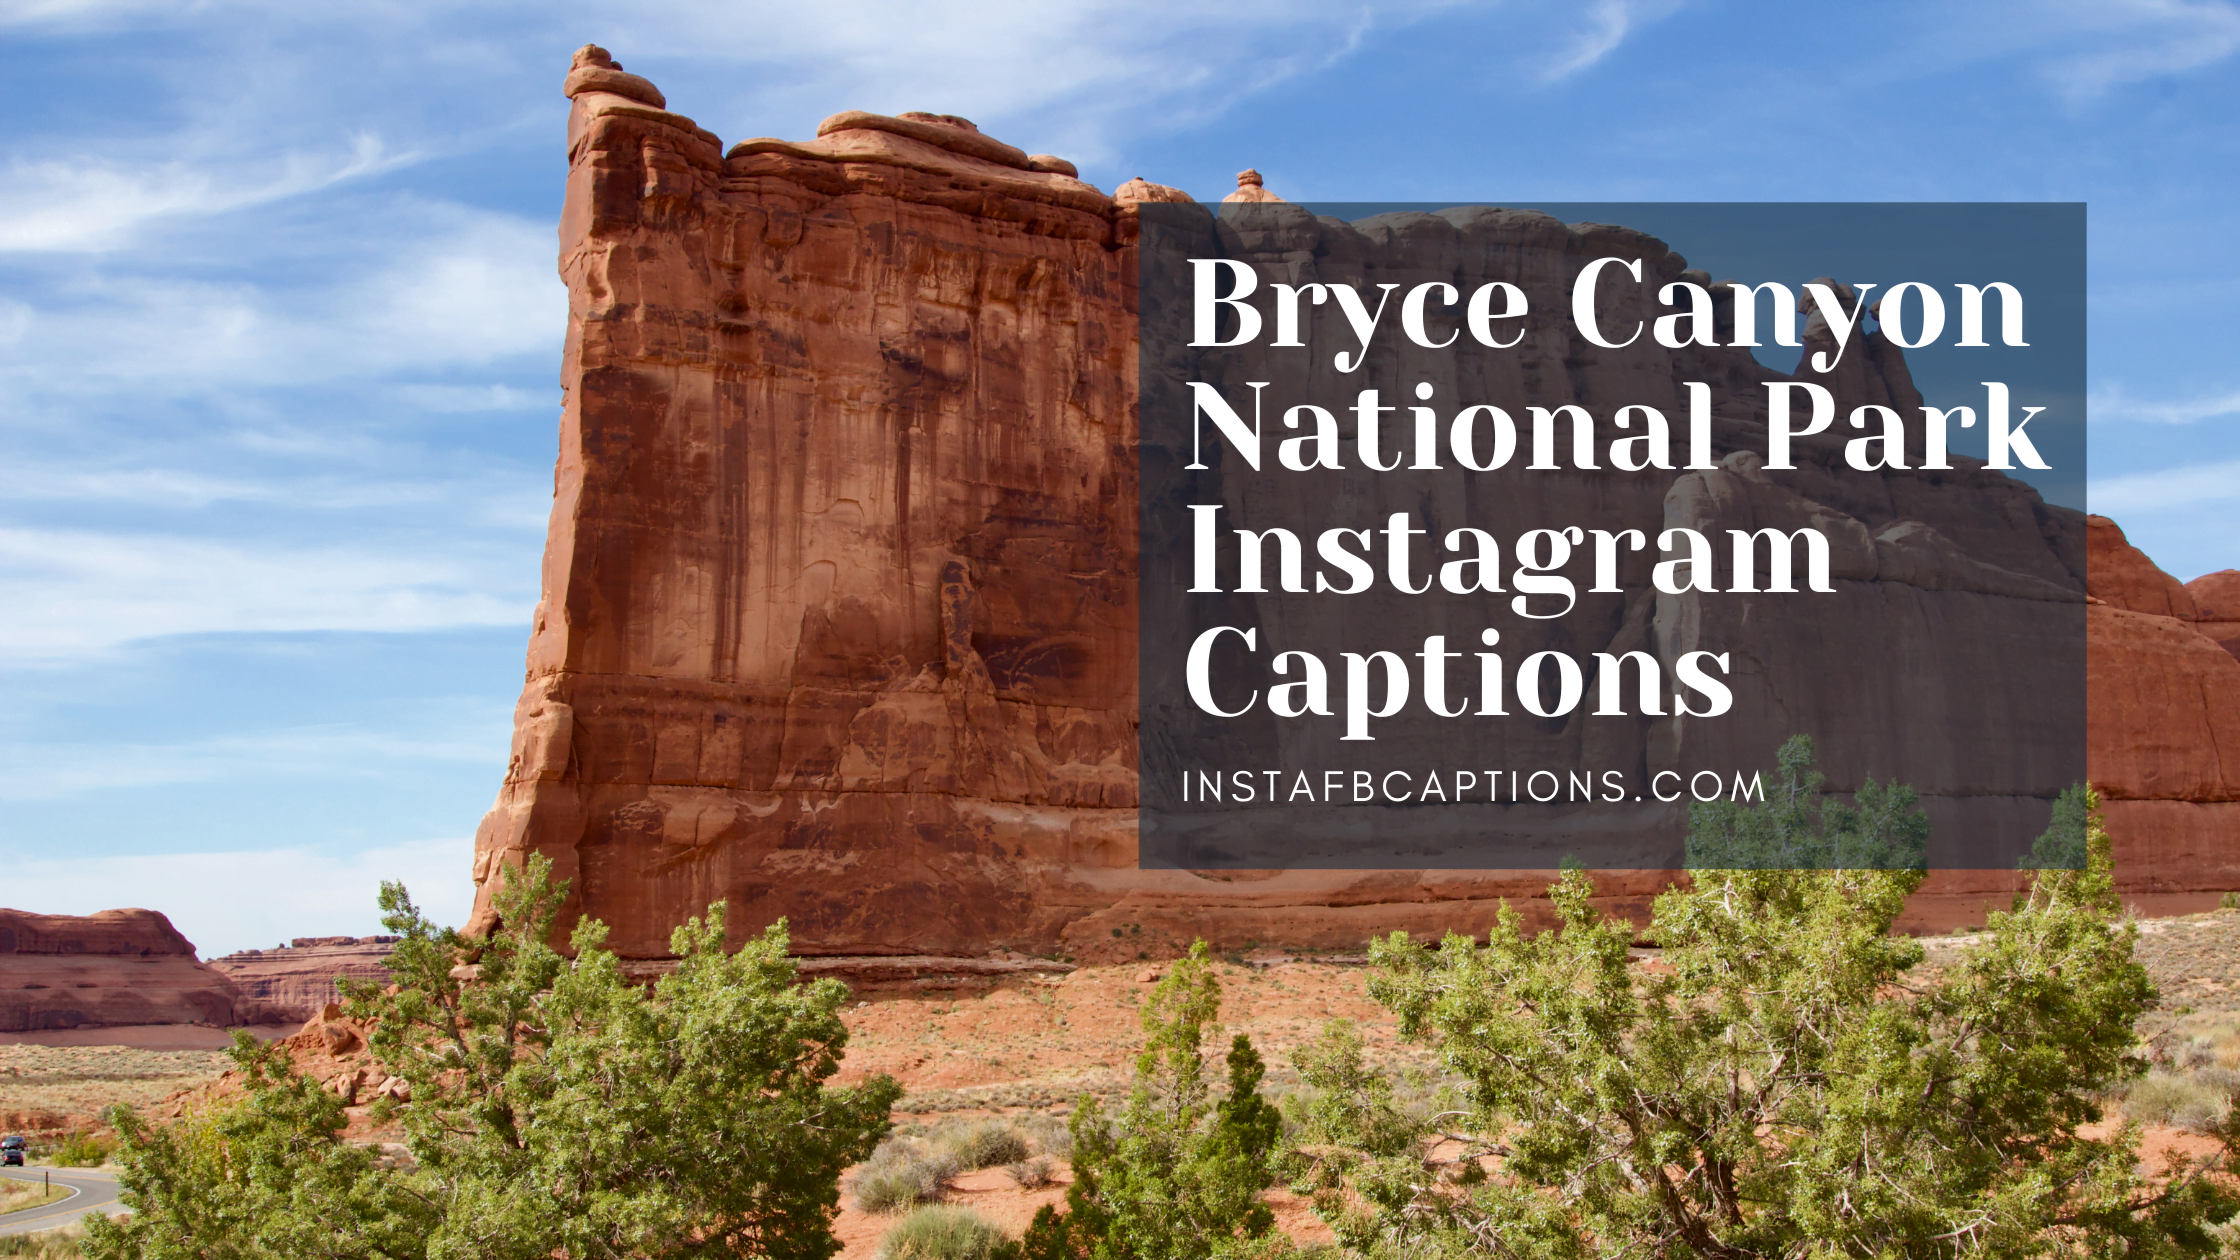 Bryce Canyon National Park Instagram Captions  - Bryce Canyon National Park Instagram Captions - 88 Bryce Canyon National Park Instagram Captions in 2022